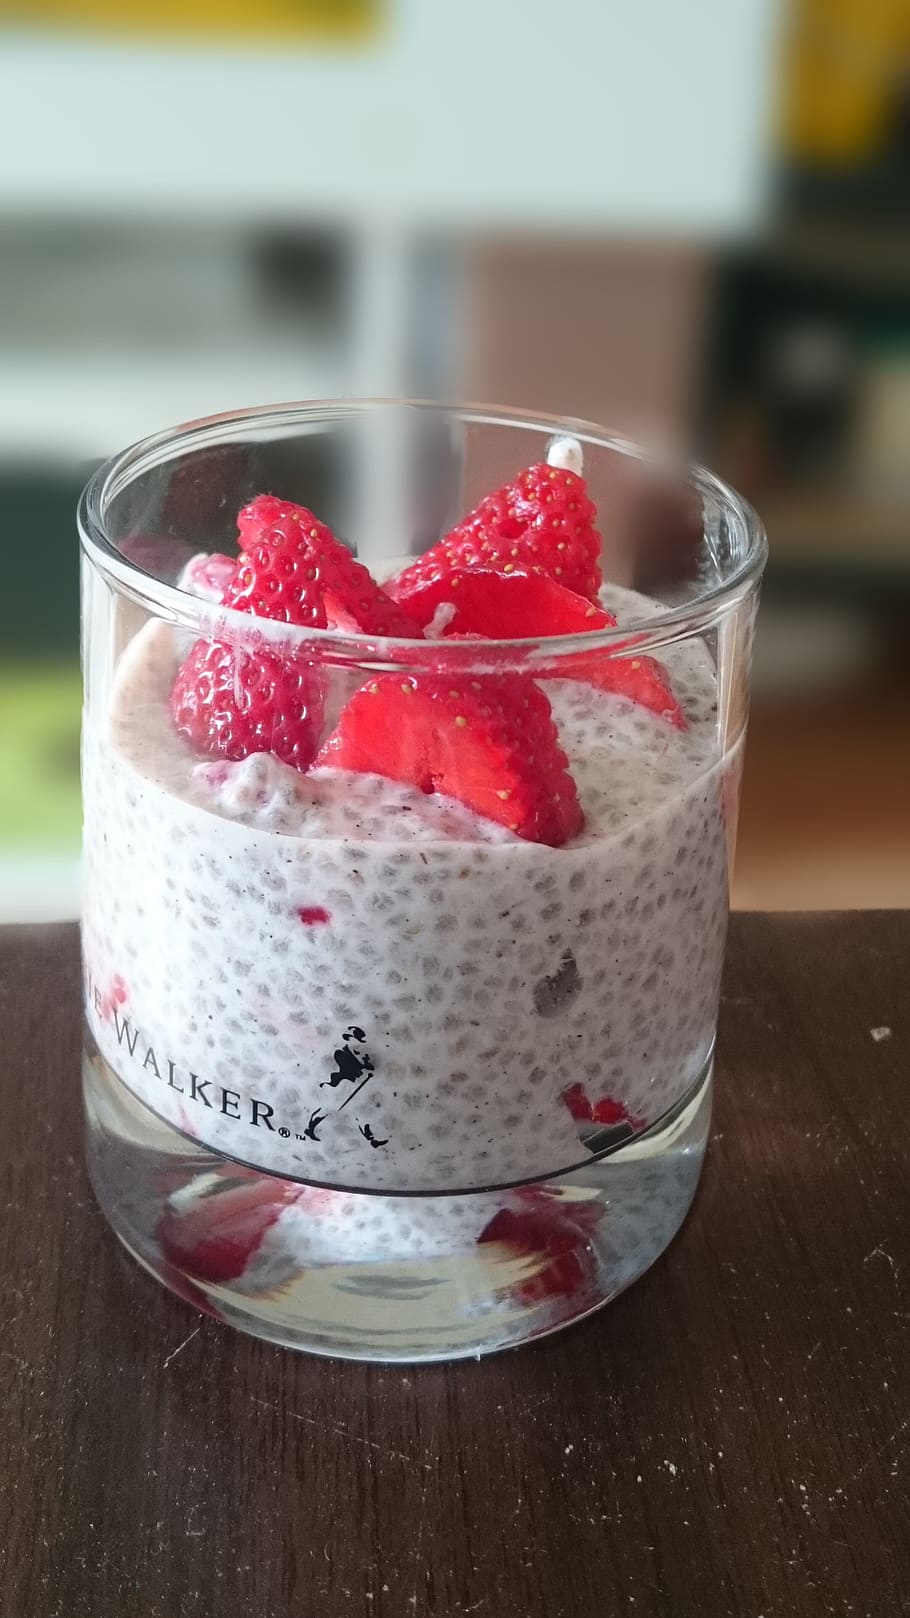 strawberry, chia seeds, pudding, food and drink, fruit, table, berry fruit, food, freshness, healthy eating